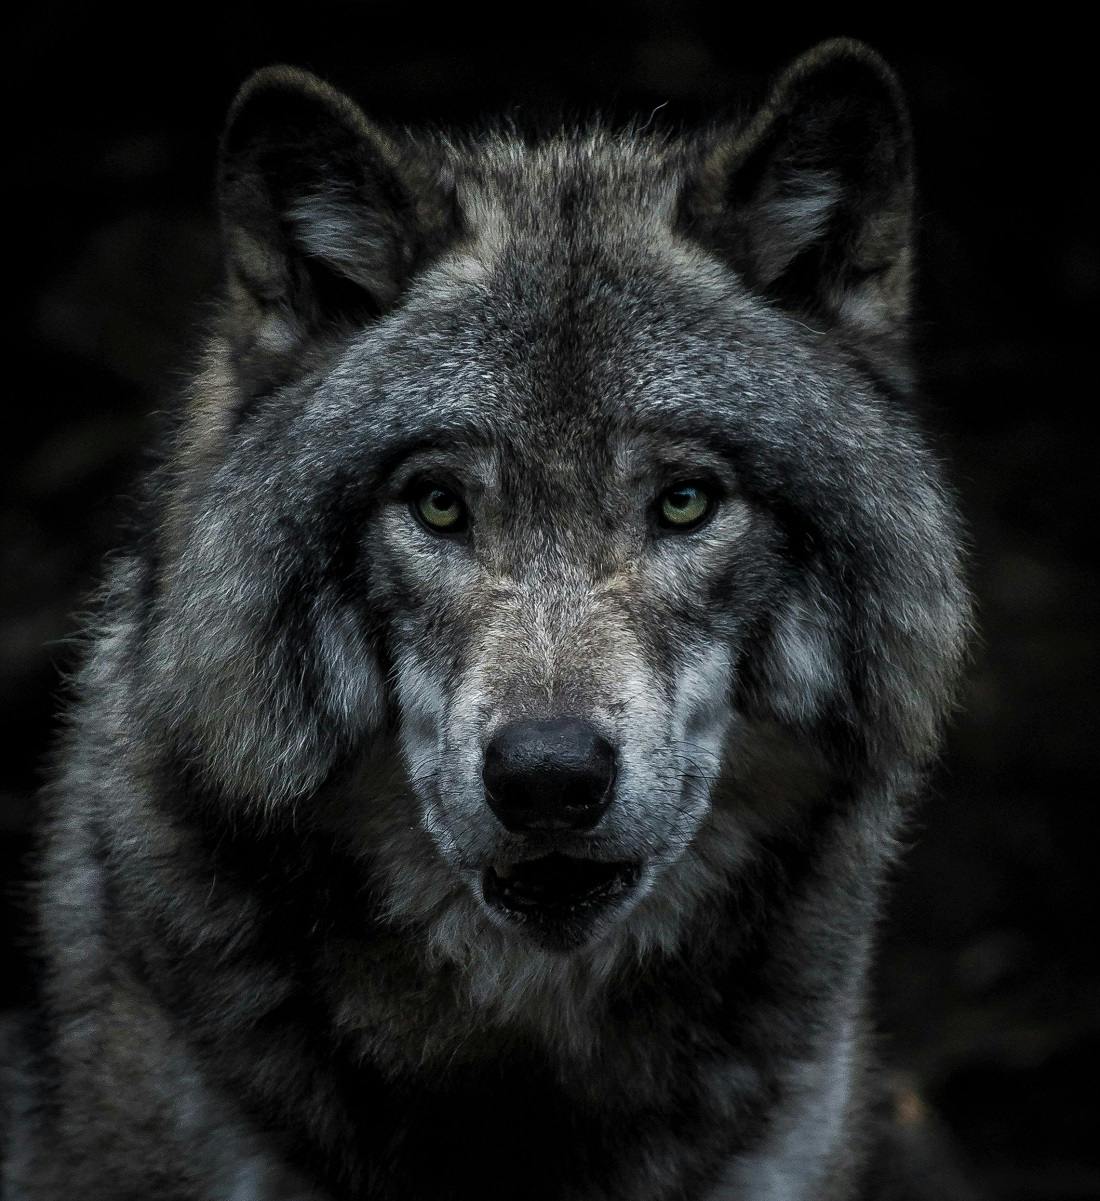 A portrait of a wolf. Wolves are keystone species who affect their whole ecosystem positively.